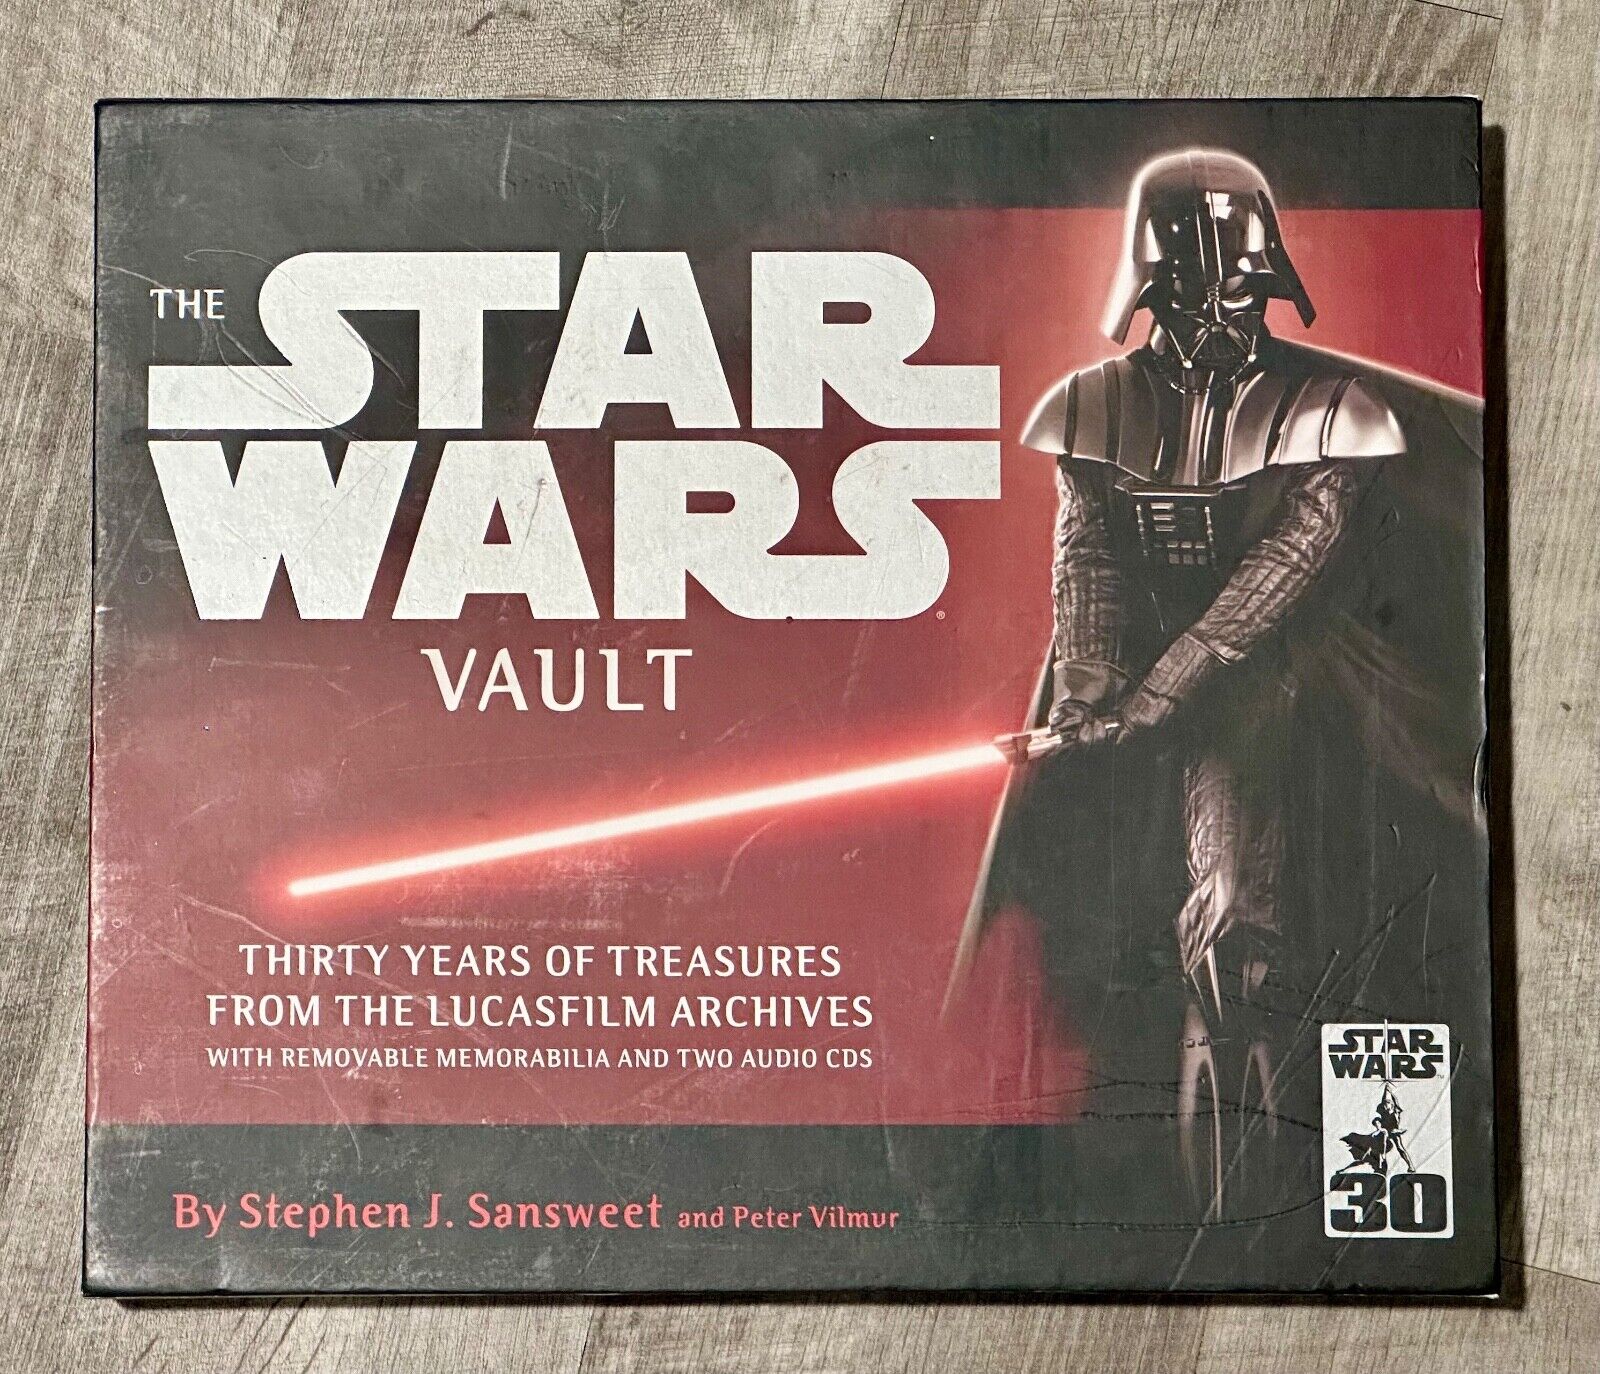 STAR WARS FANS RARE FIND 30 YEARS OF TREASURES FROM THE LUCASFILM ARCHIVES